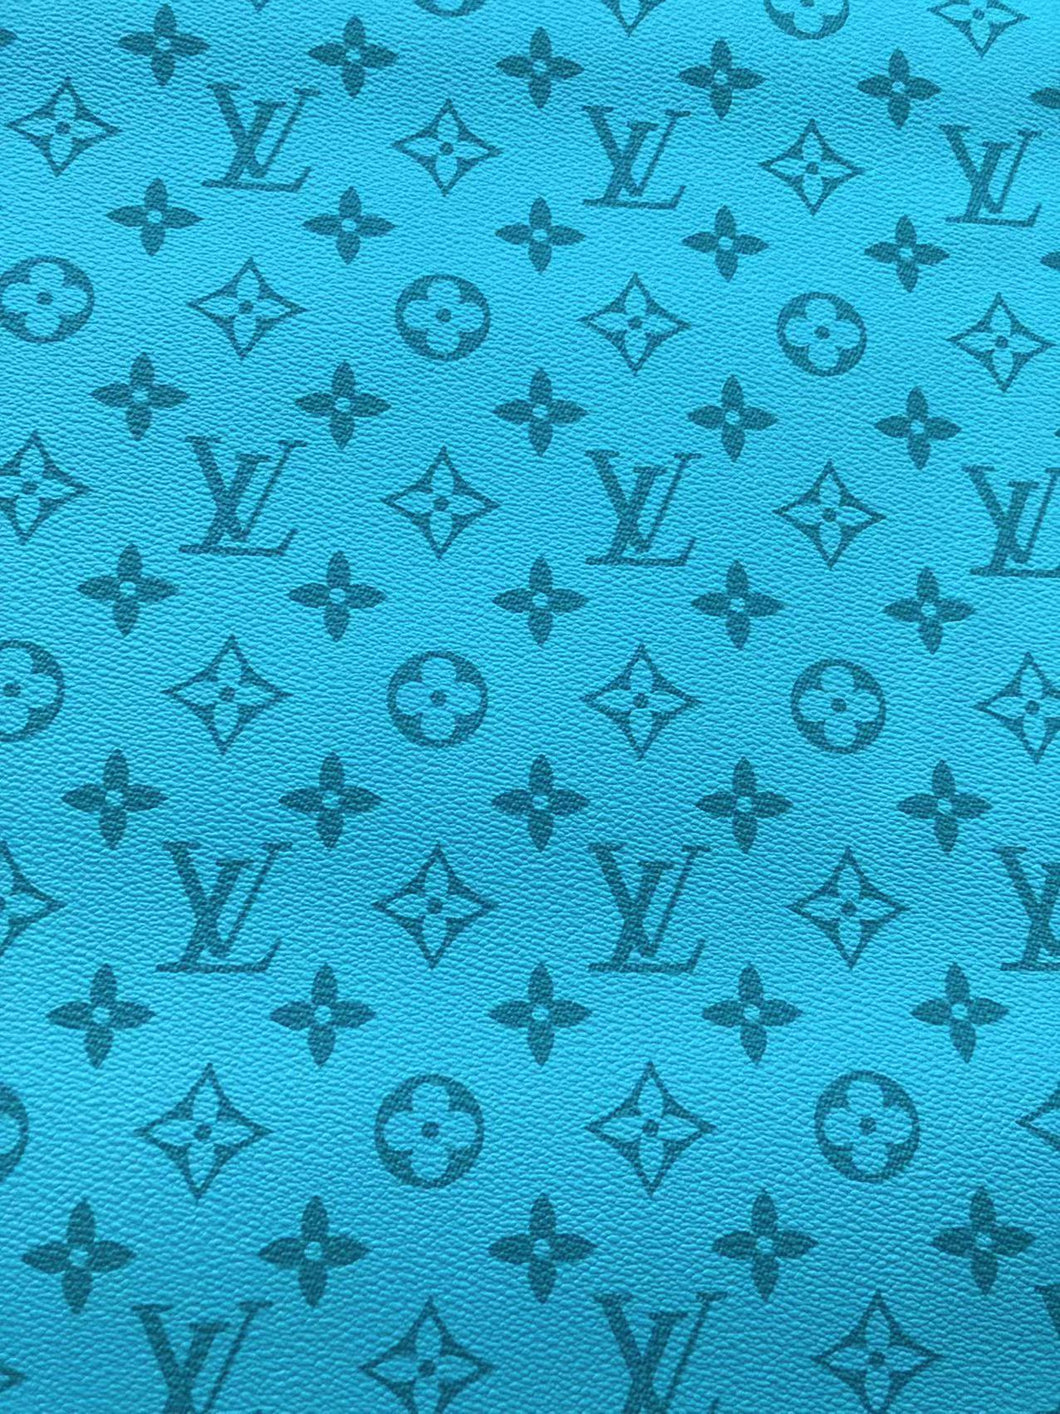 Special Blue Lv Leather Vinyl for Custom Sneakers